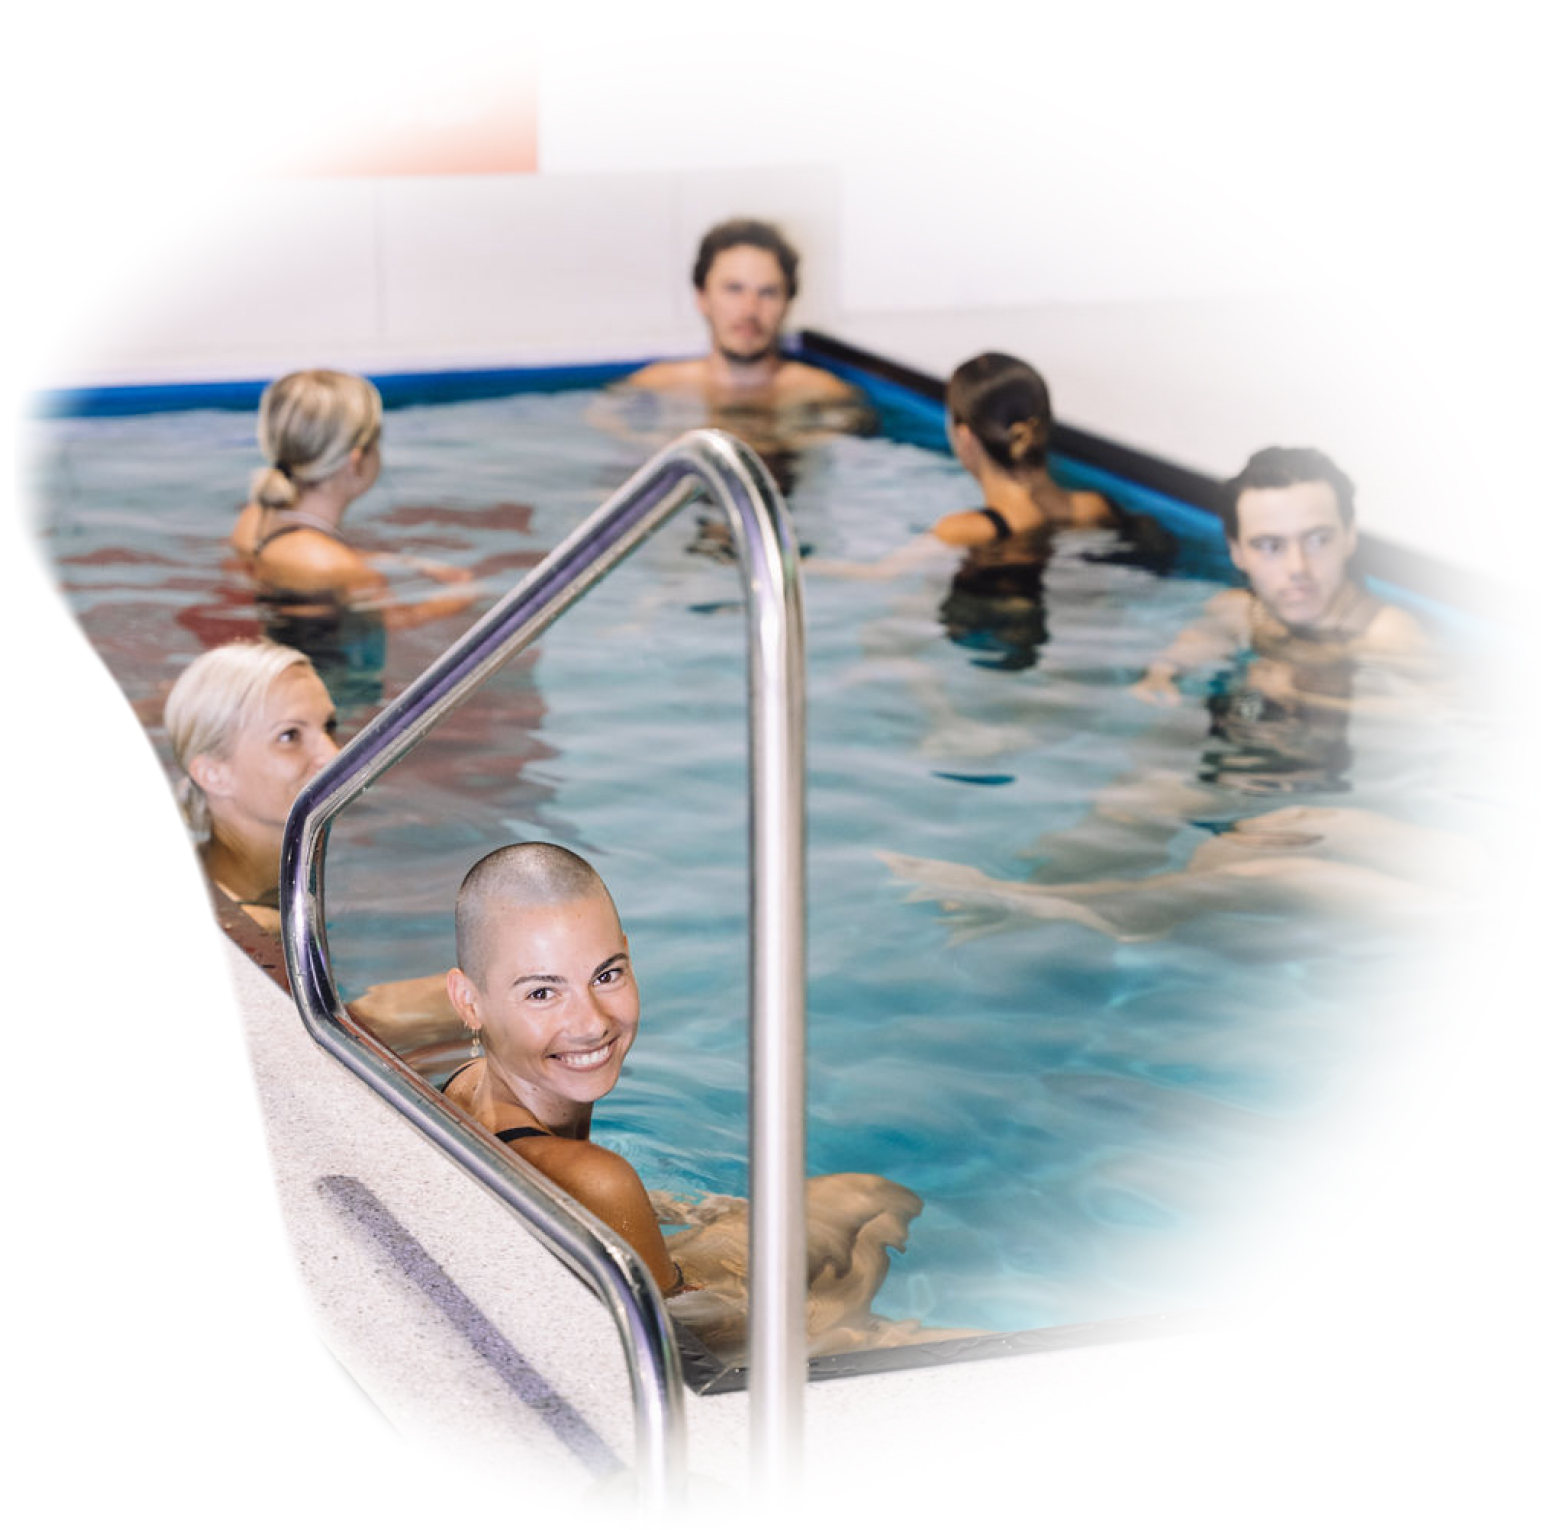 Group of people using the contrast therapy pools at P3 recovery